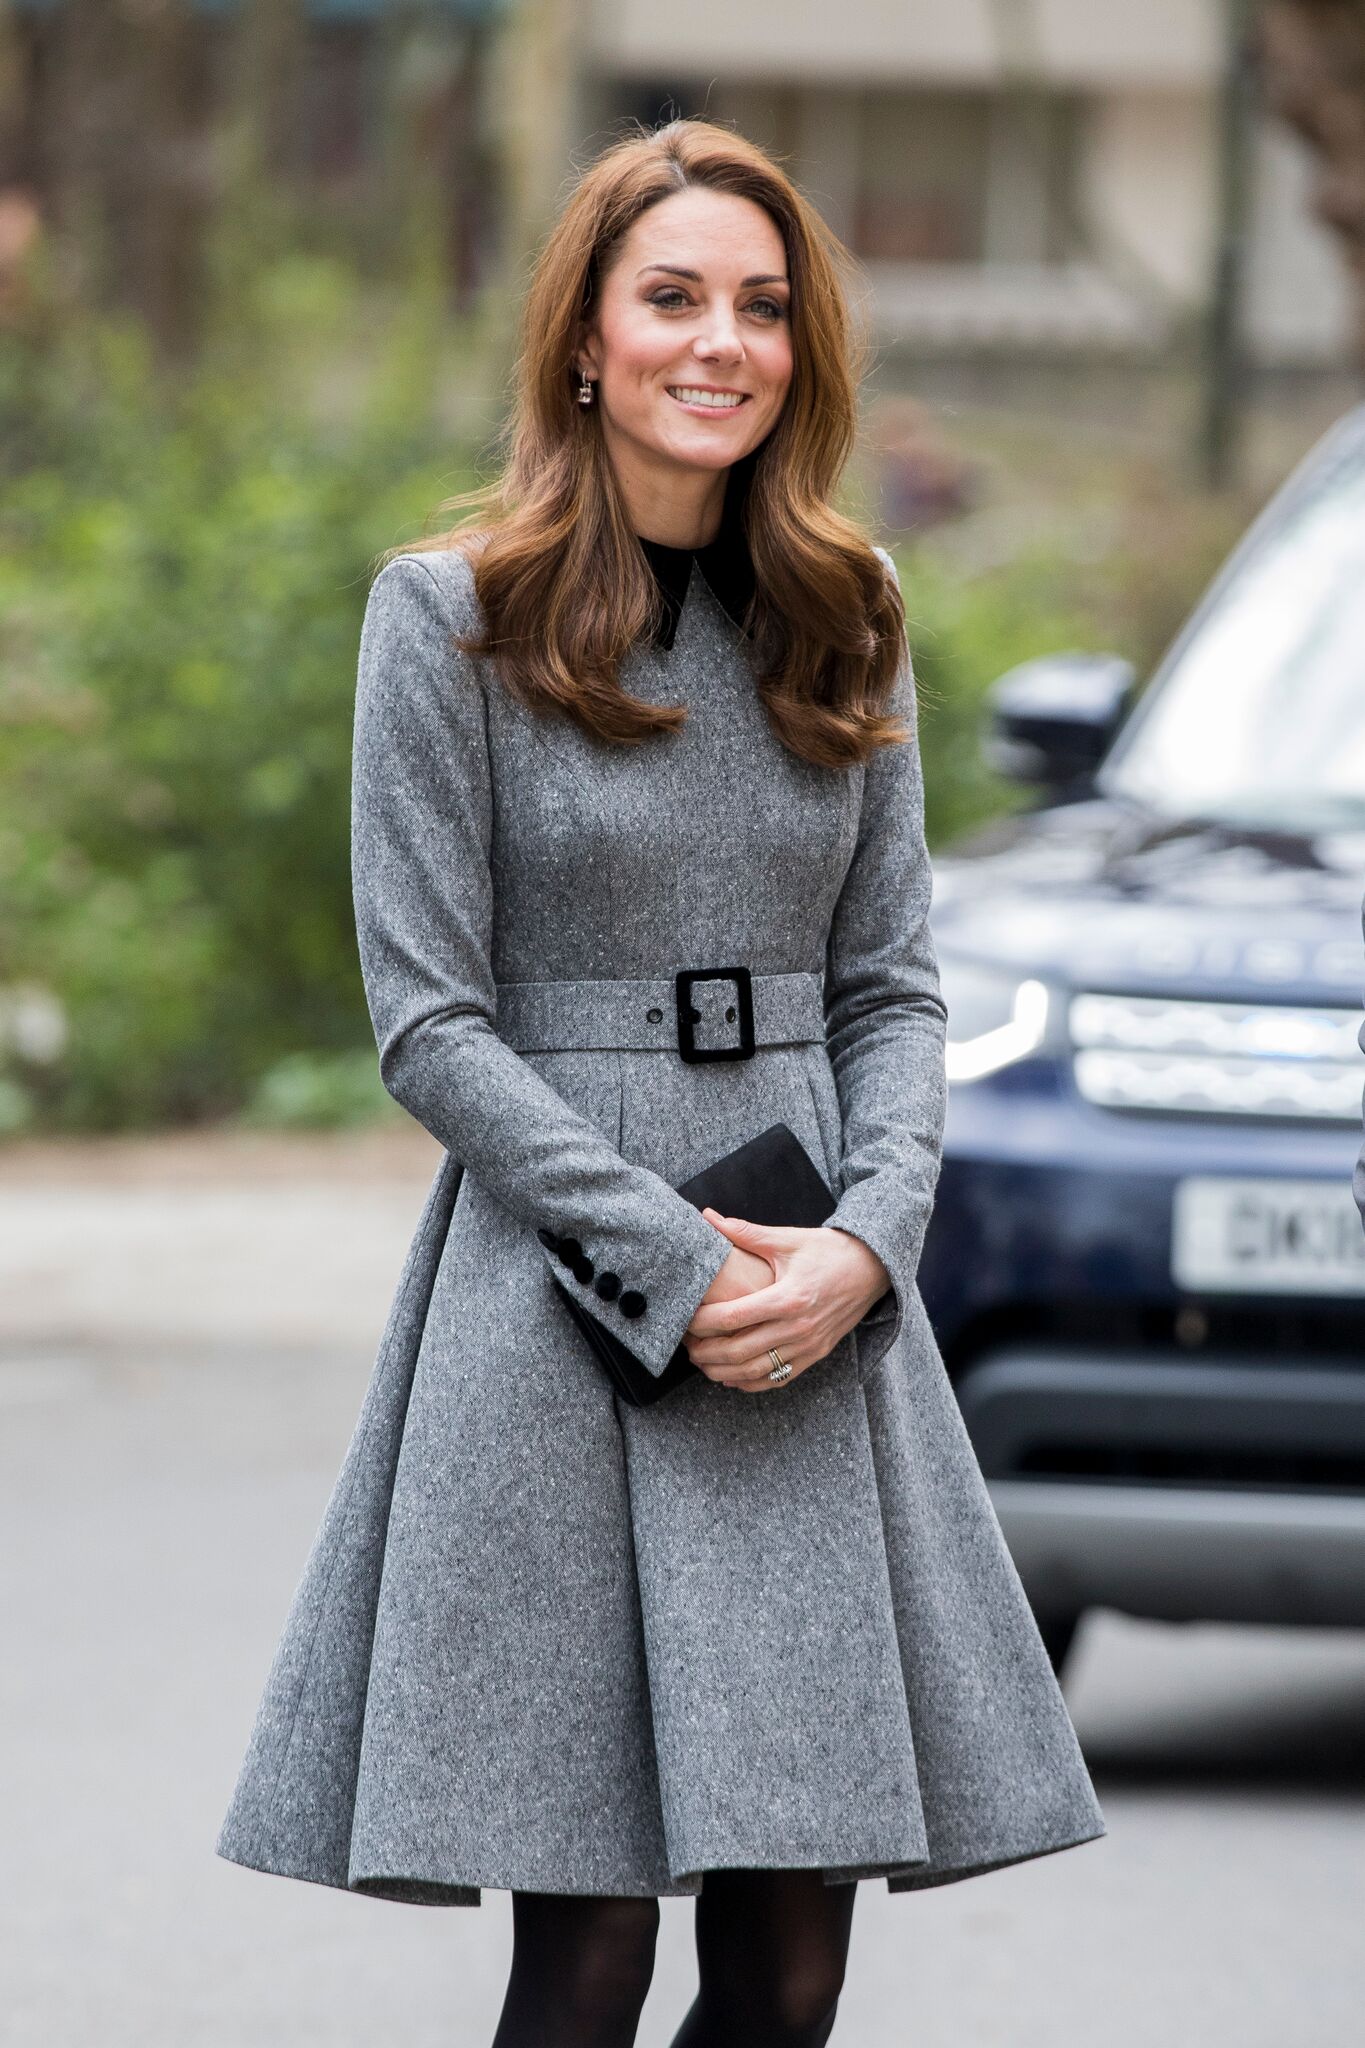 Duchess Of Cambridge visits The Foundling Museum | Getty Images